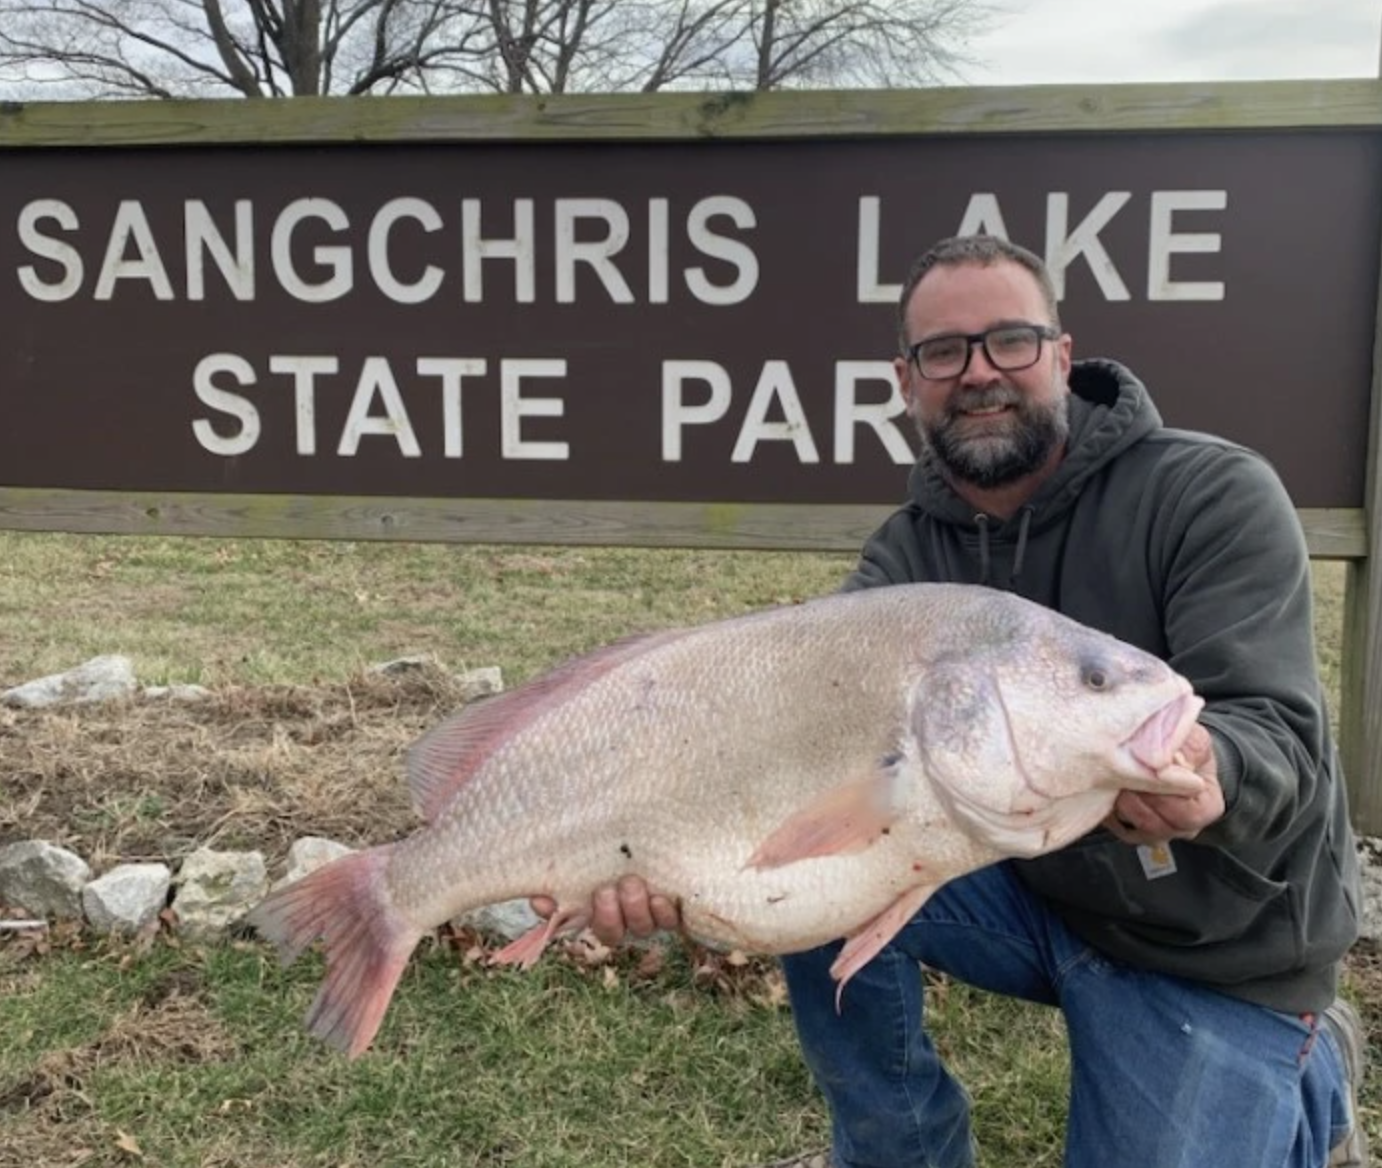 A man holds a freshwater drum in front of a state park sign.